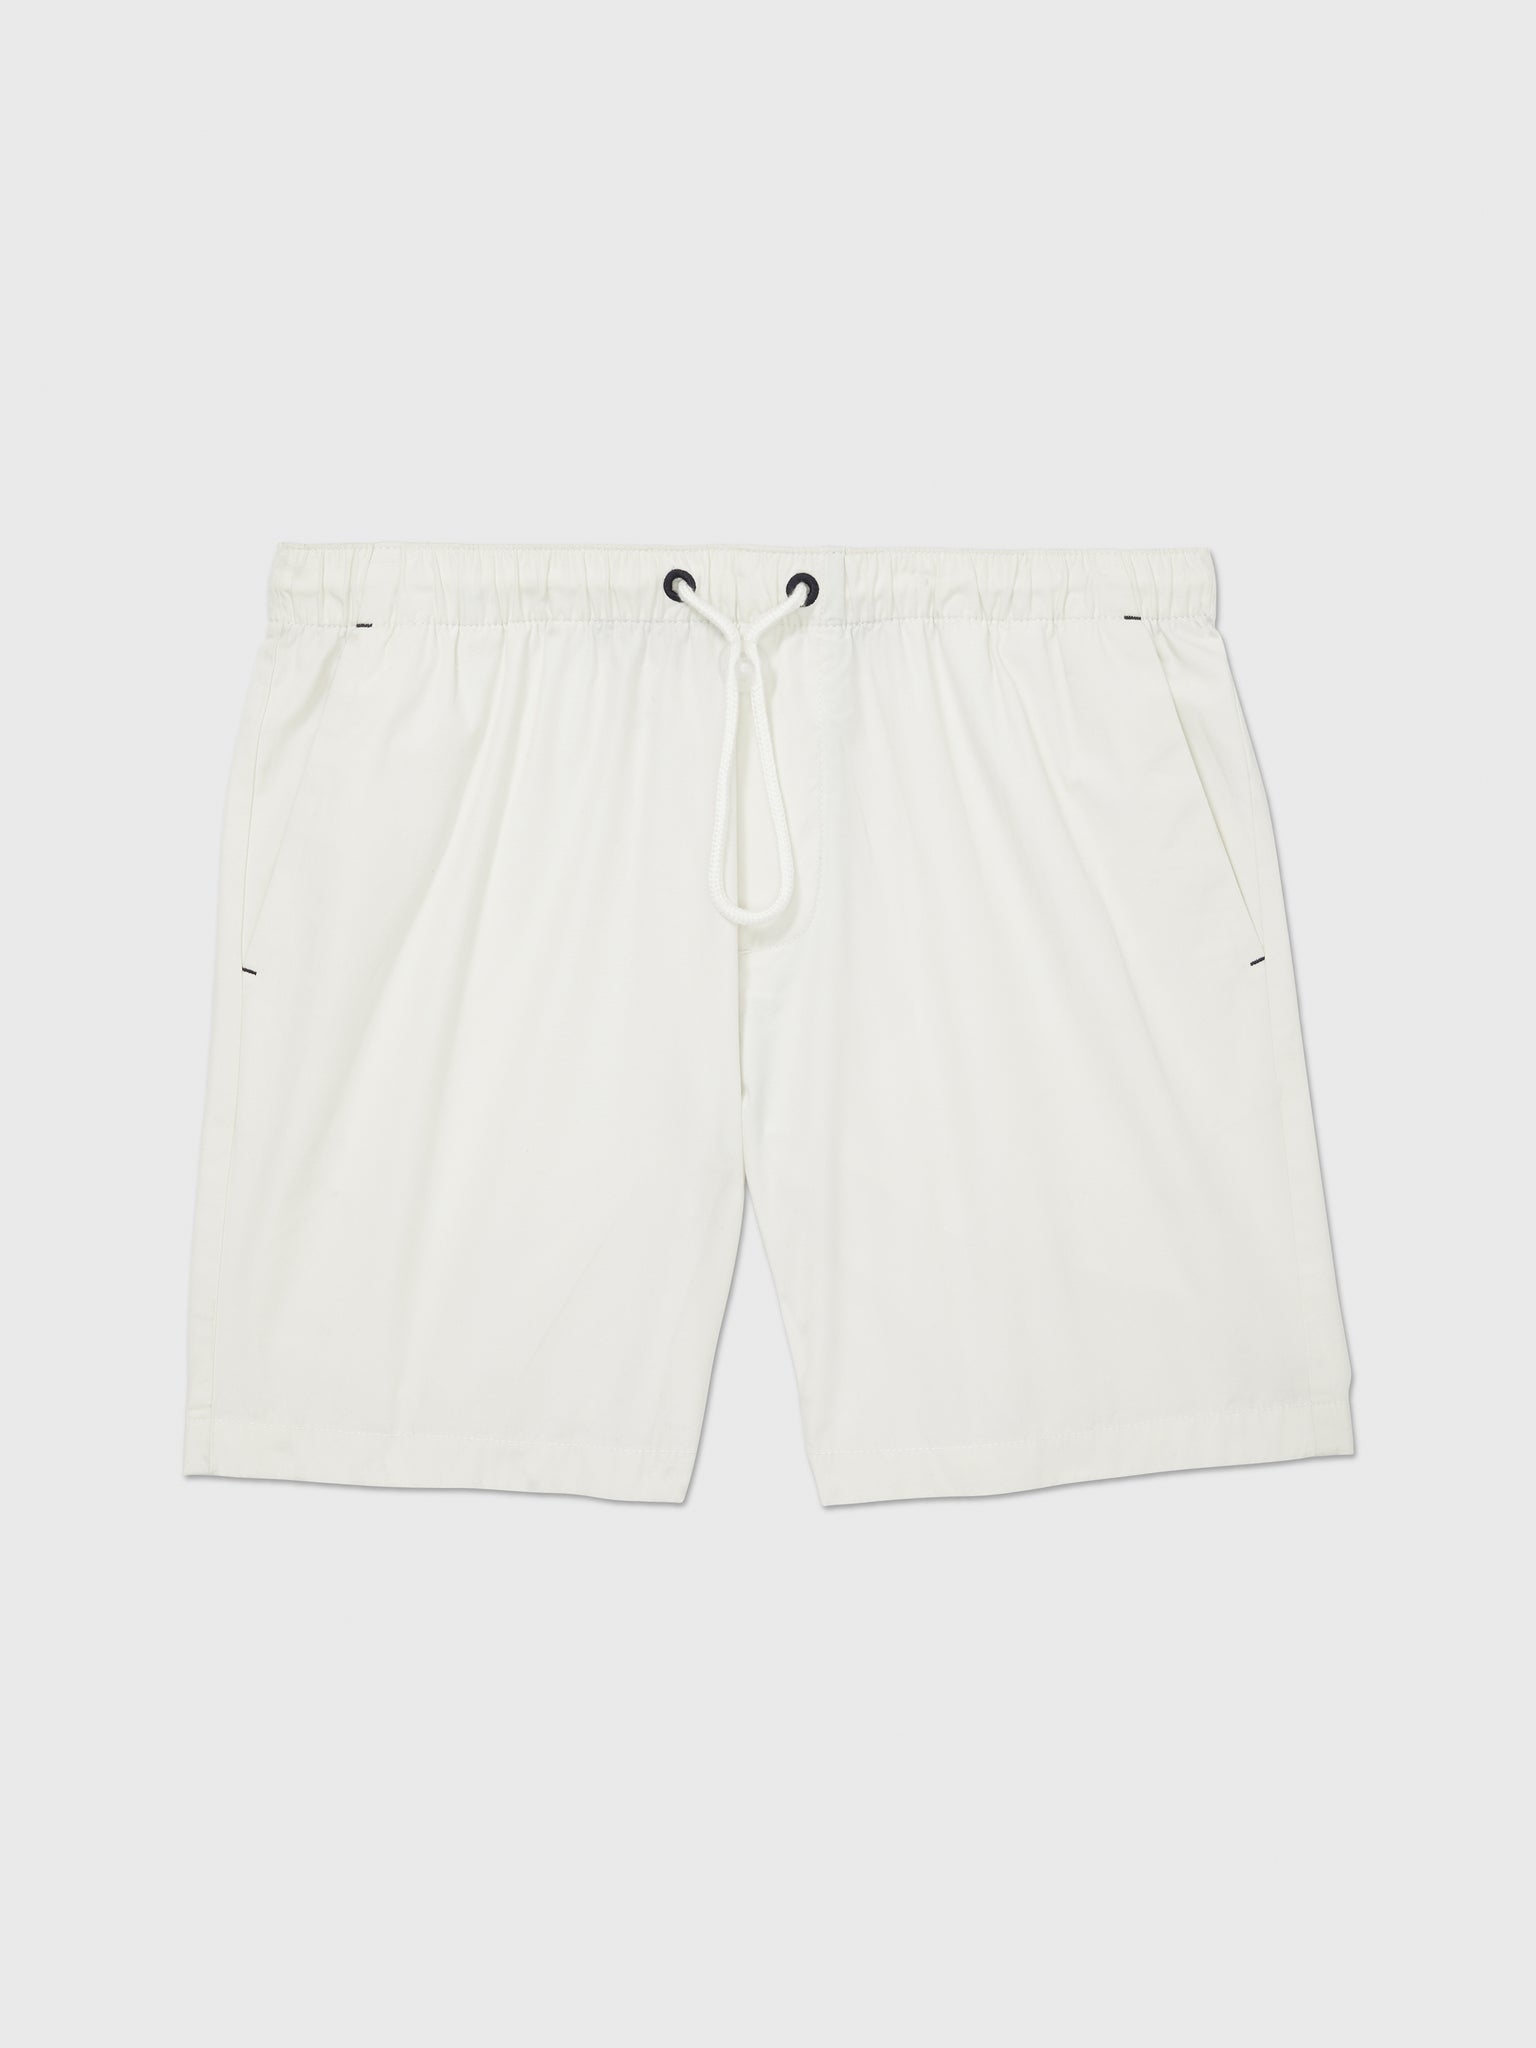 Crew Pull On Shorts (Mens) -White Suede